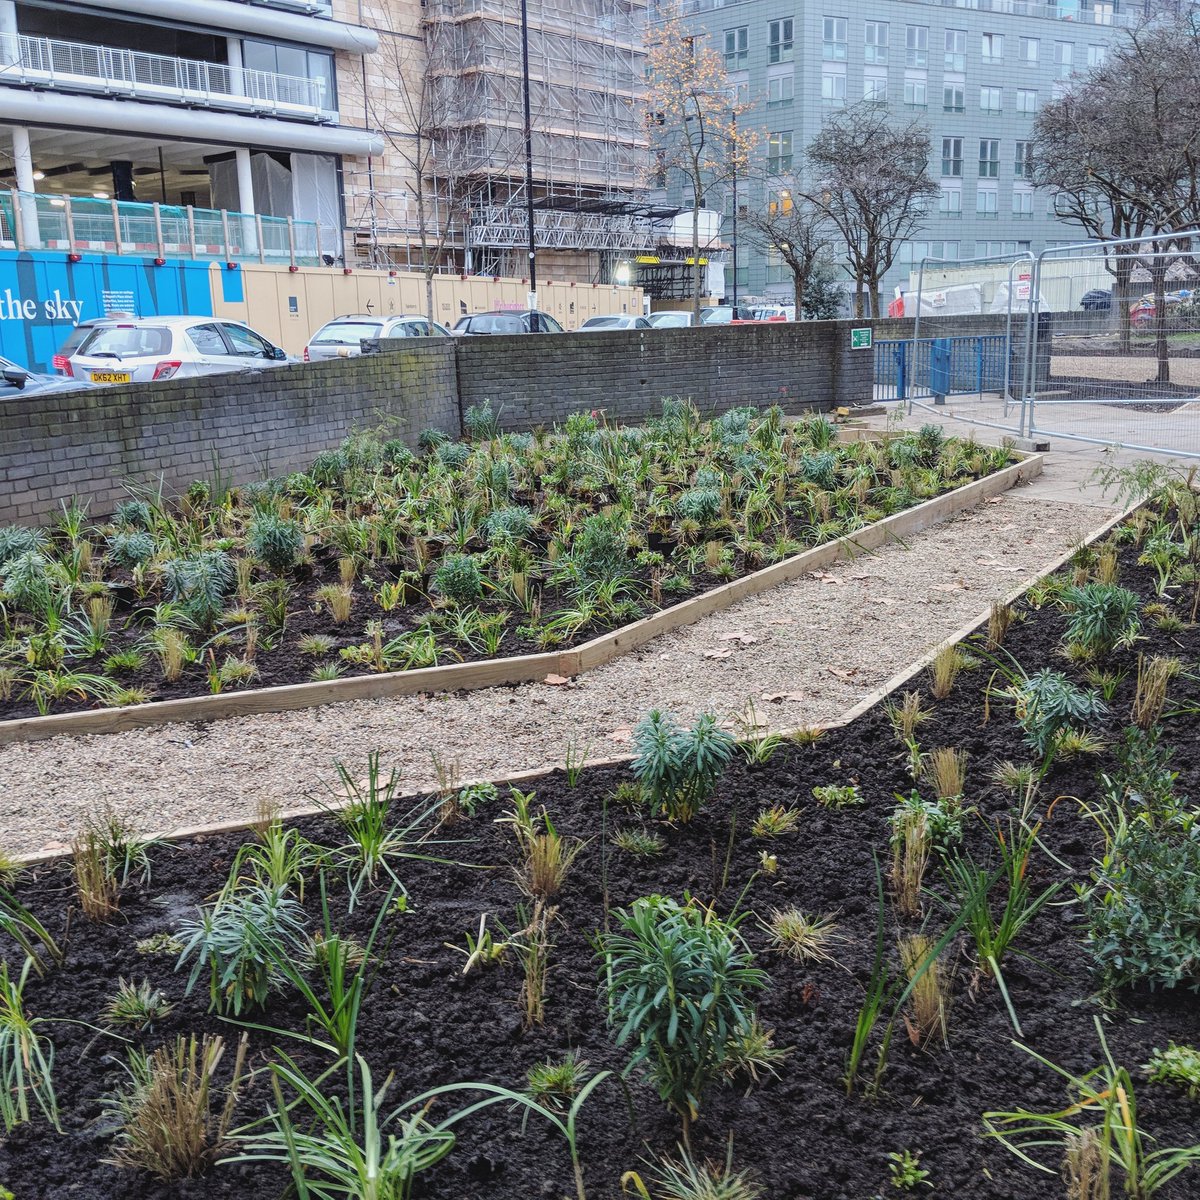 Great to get stuck into some planting today with @cityscapesuk on their #pocketpark for #eustongreenlink #communitypark #matrixplanting #ecologicalplanting #perrenialmeadow